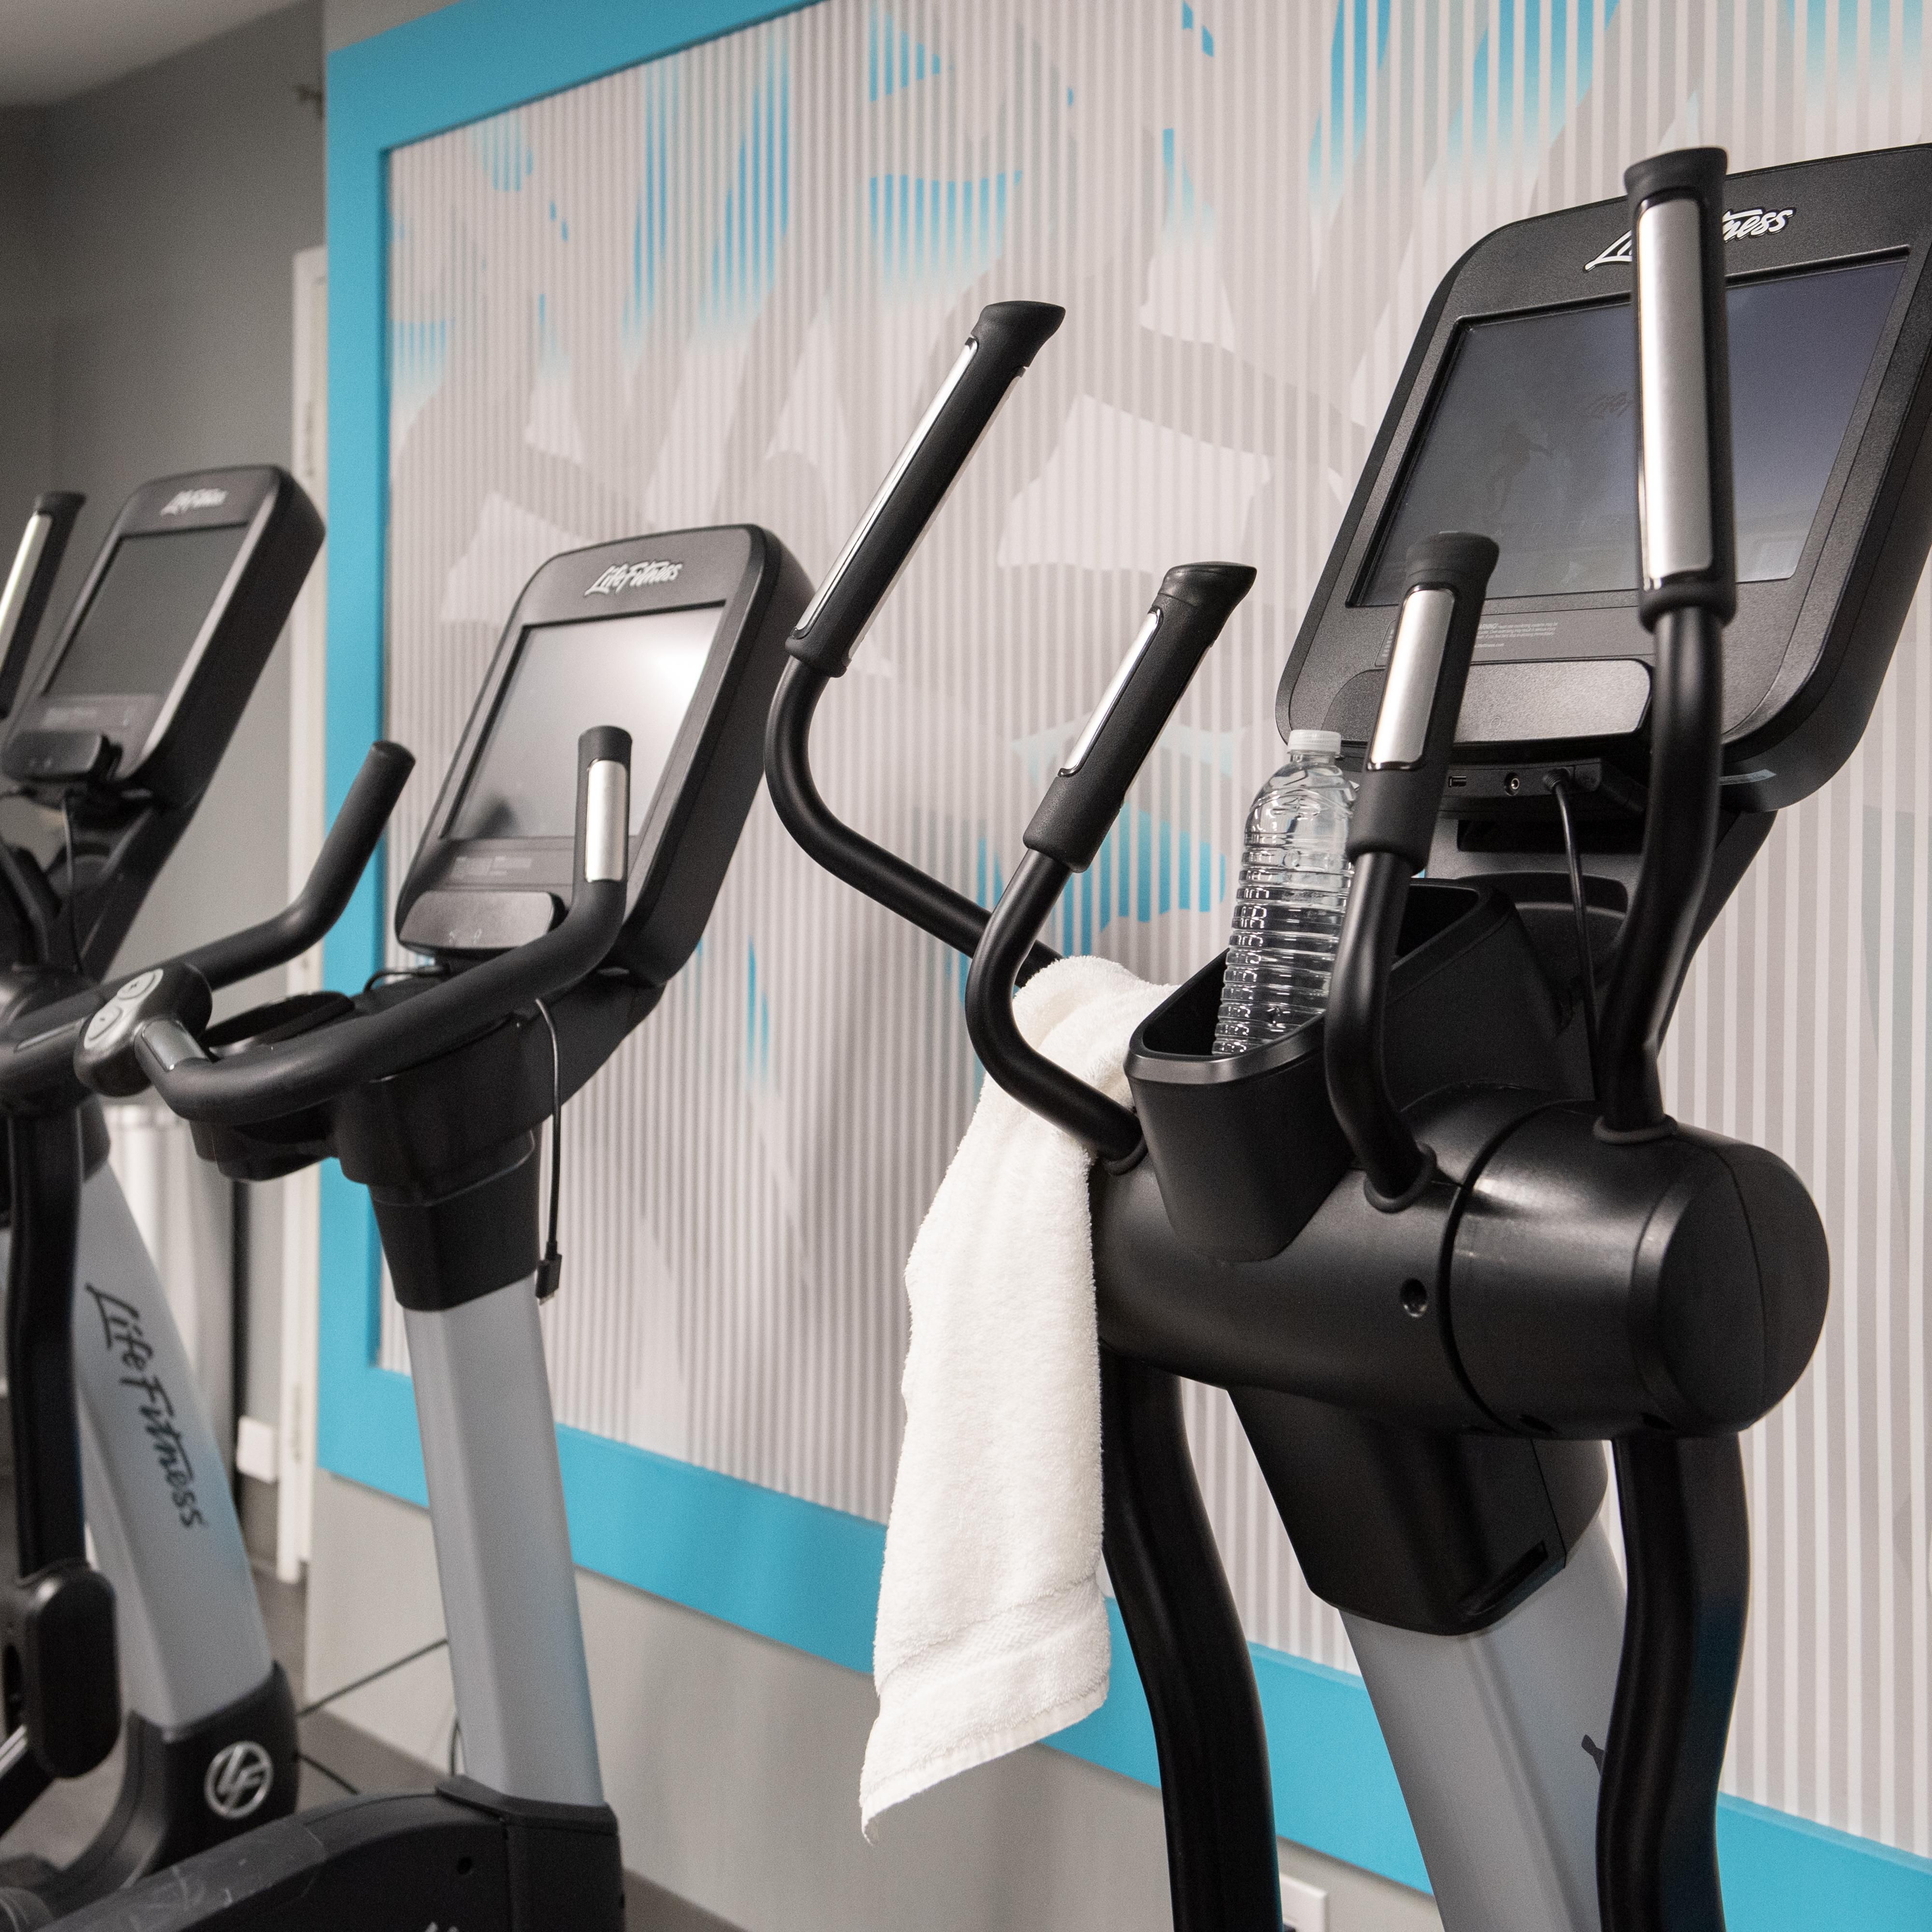 Cardio, free weights, and suana available for guests.